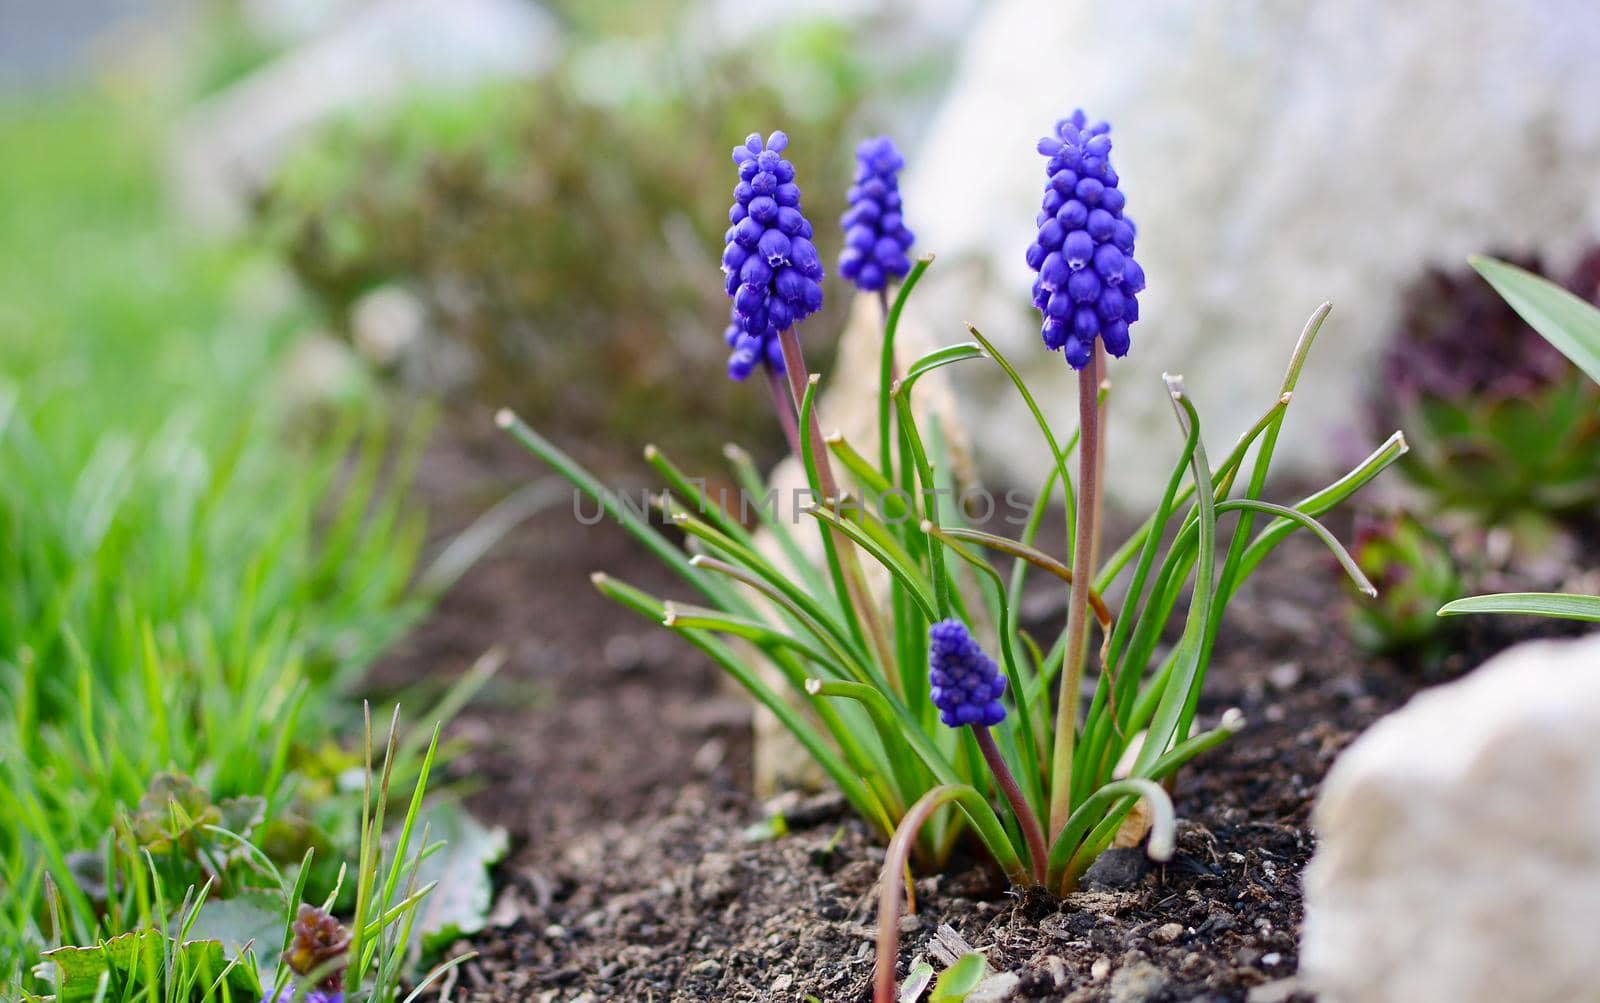 Close Up of Blue Muscari Armeniacum or Armenian Grape Hyacinth Bunch, Growing in the Garden from the Soil at Early Spring Season.